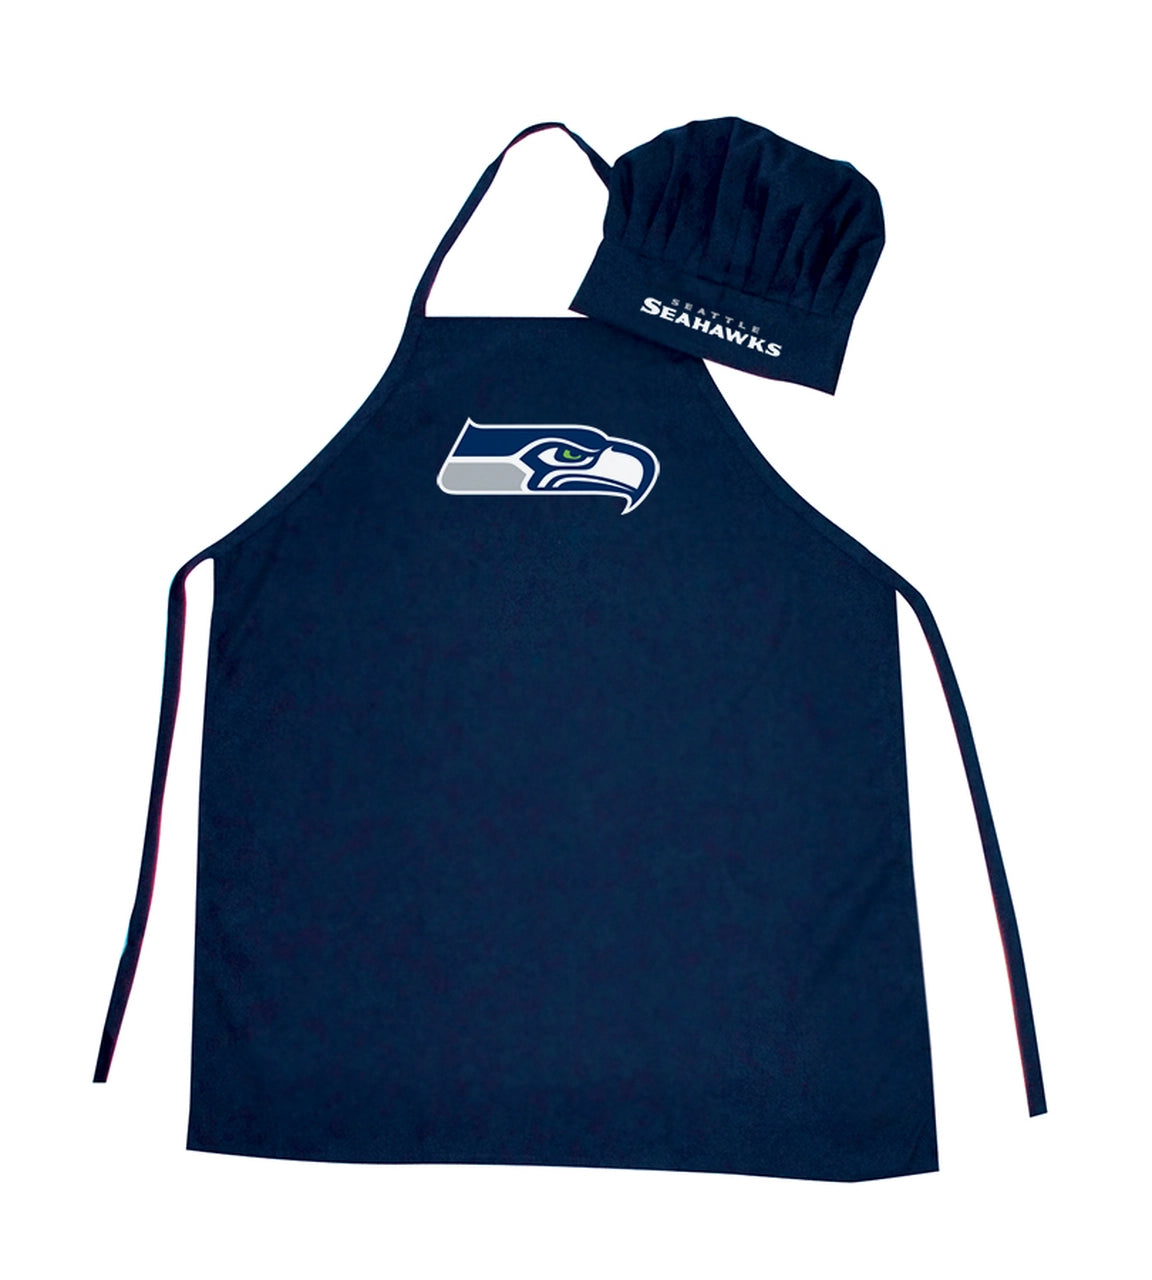 Seattle Seahawks Apron and Chef Hat Set by PSG